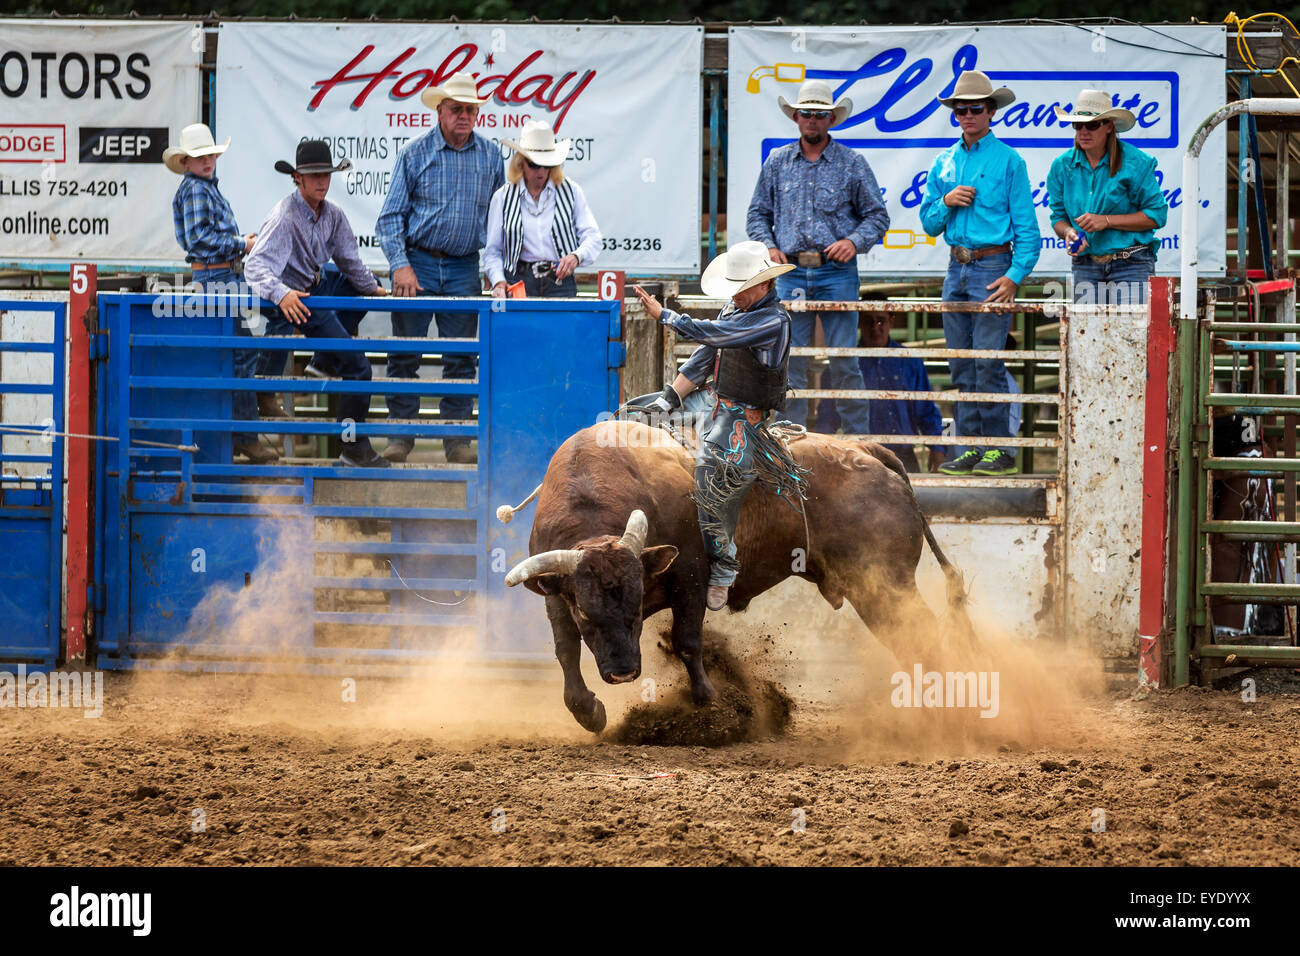 Bull riding competition, Philomath Frolic & Rodeo, Oregon, US